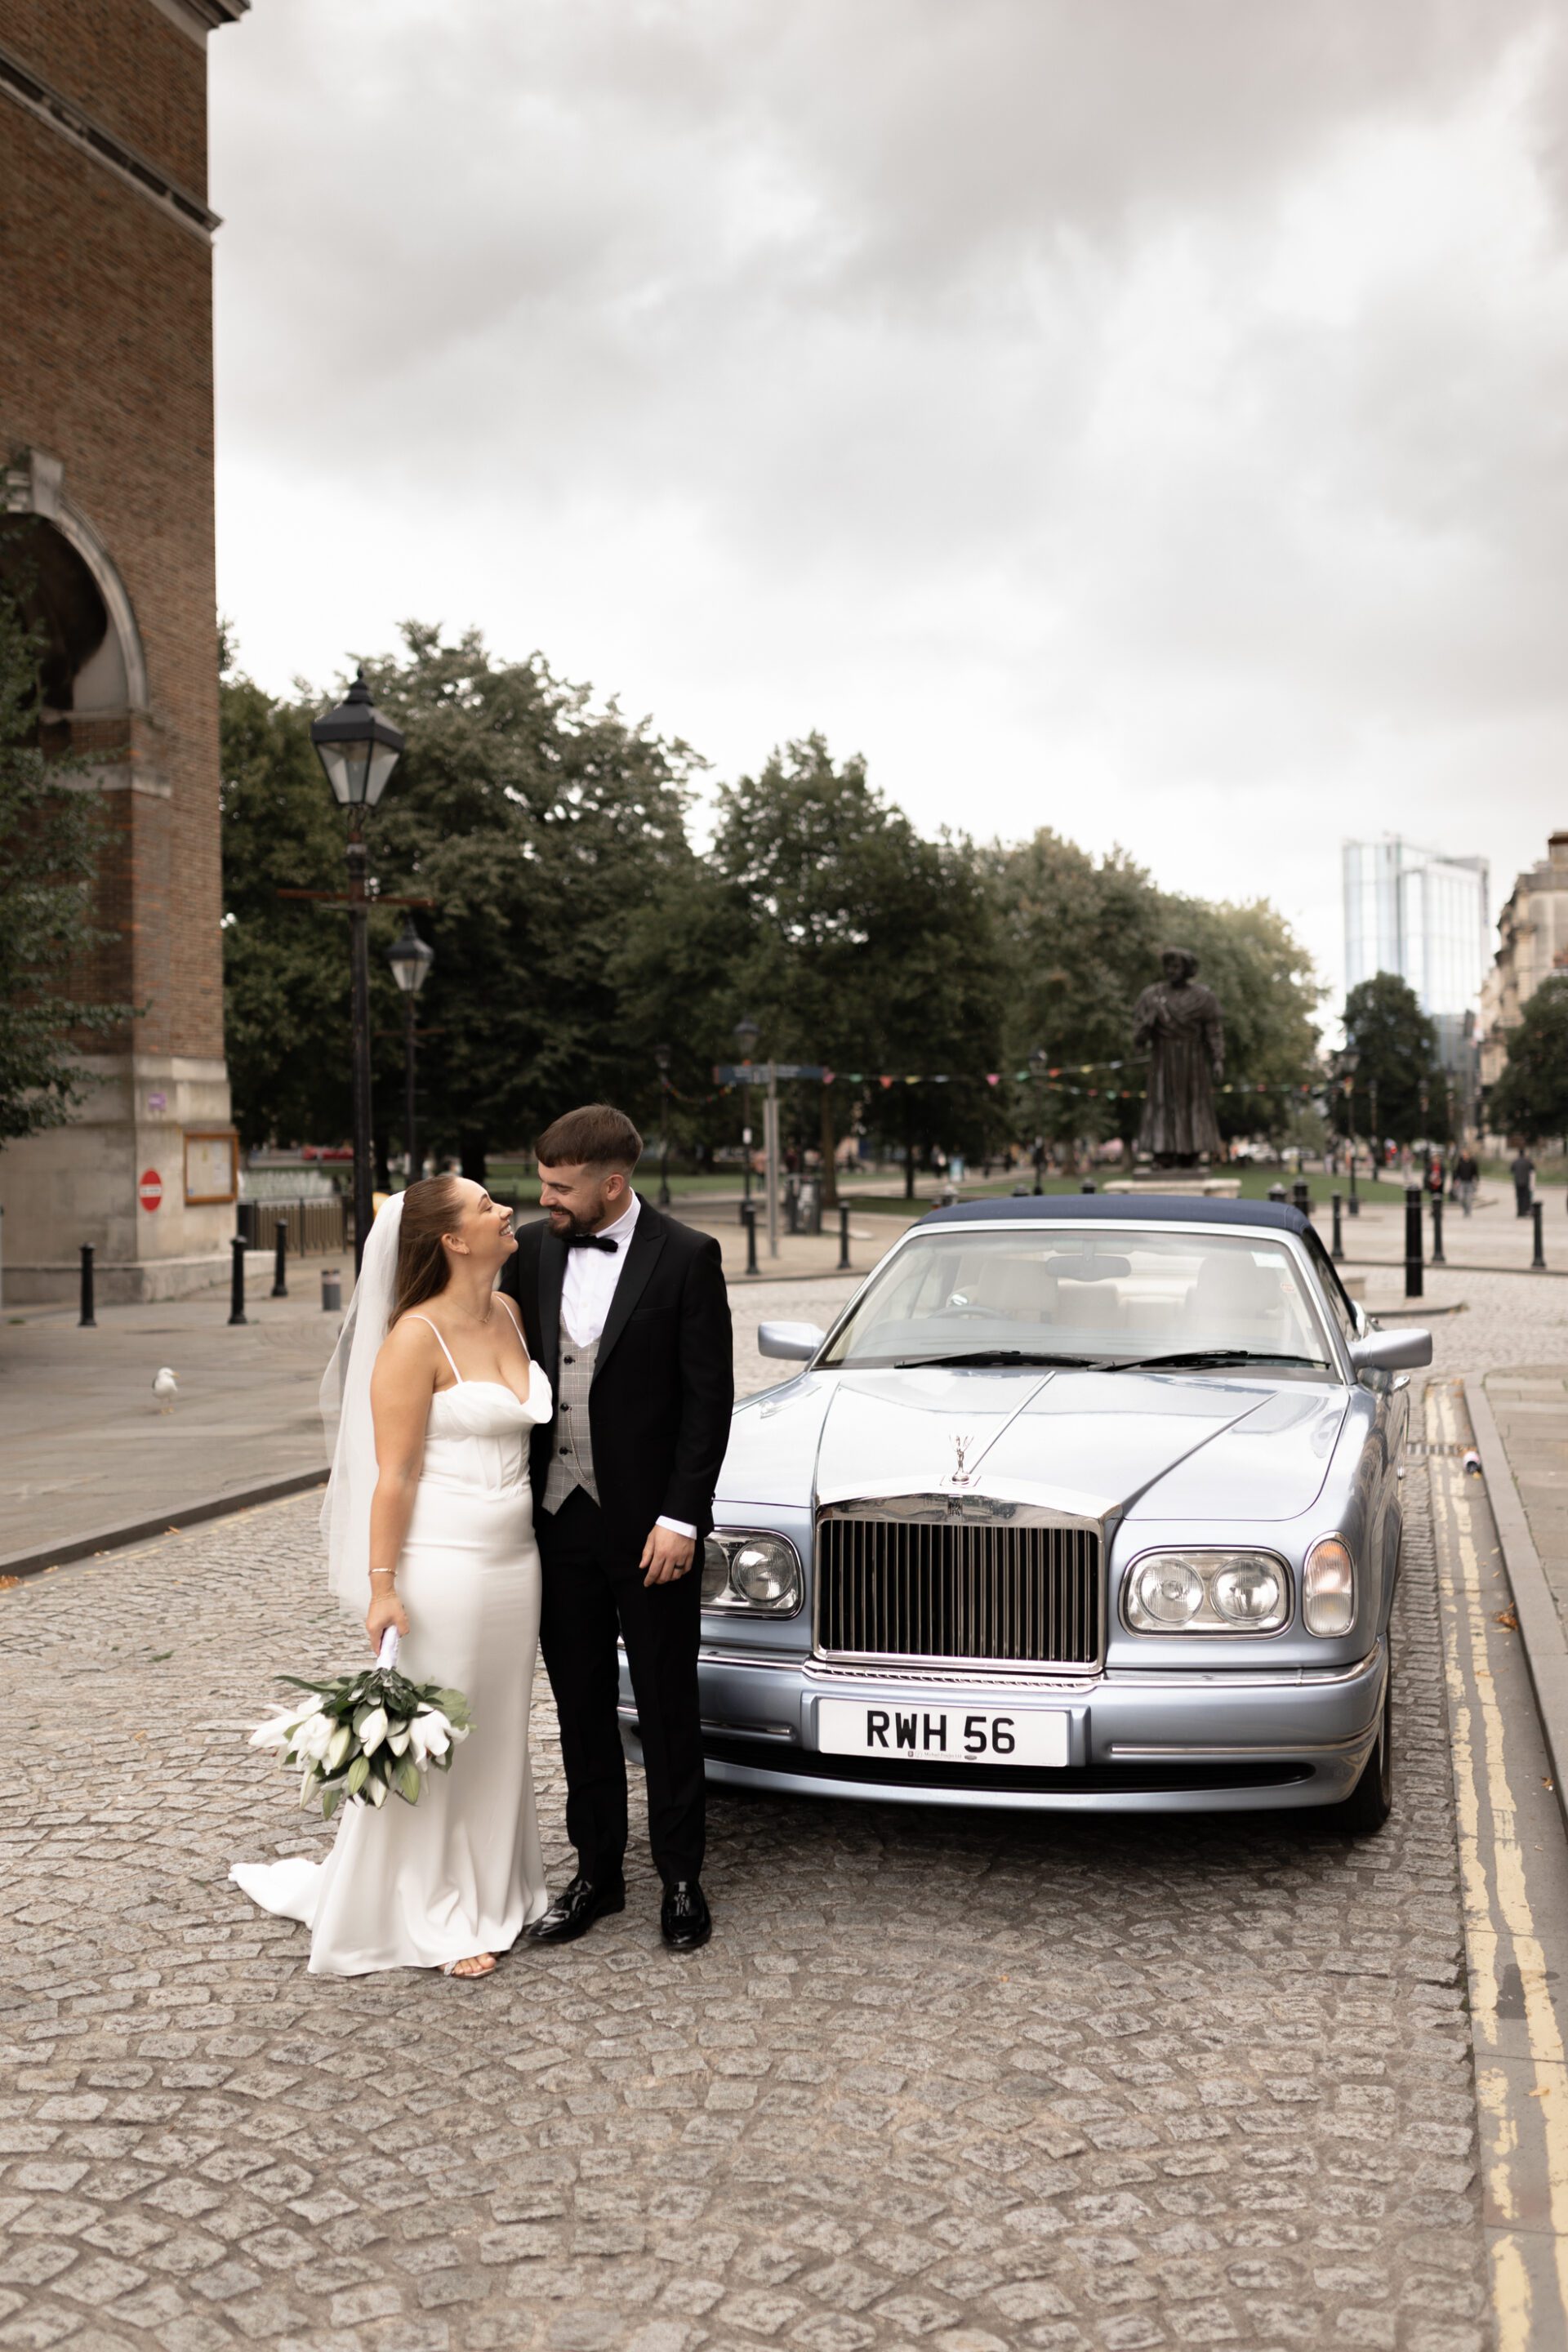 The bride and groom pose in front of their classic wedding car during their Bristol couple portrait session